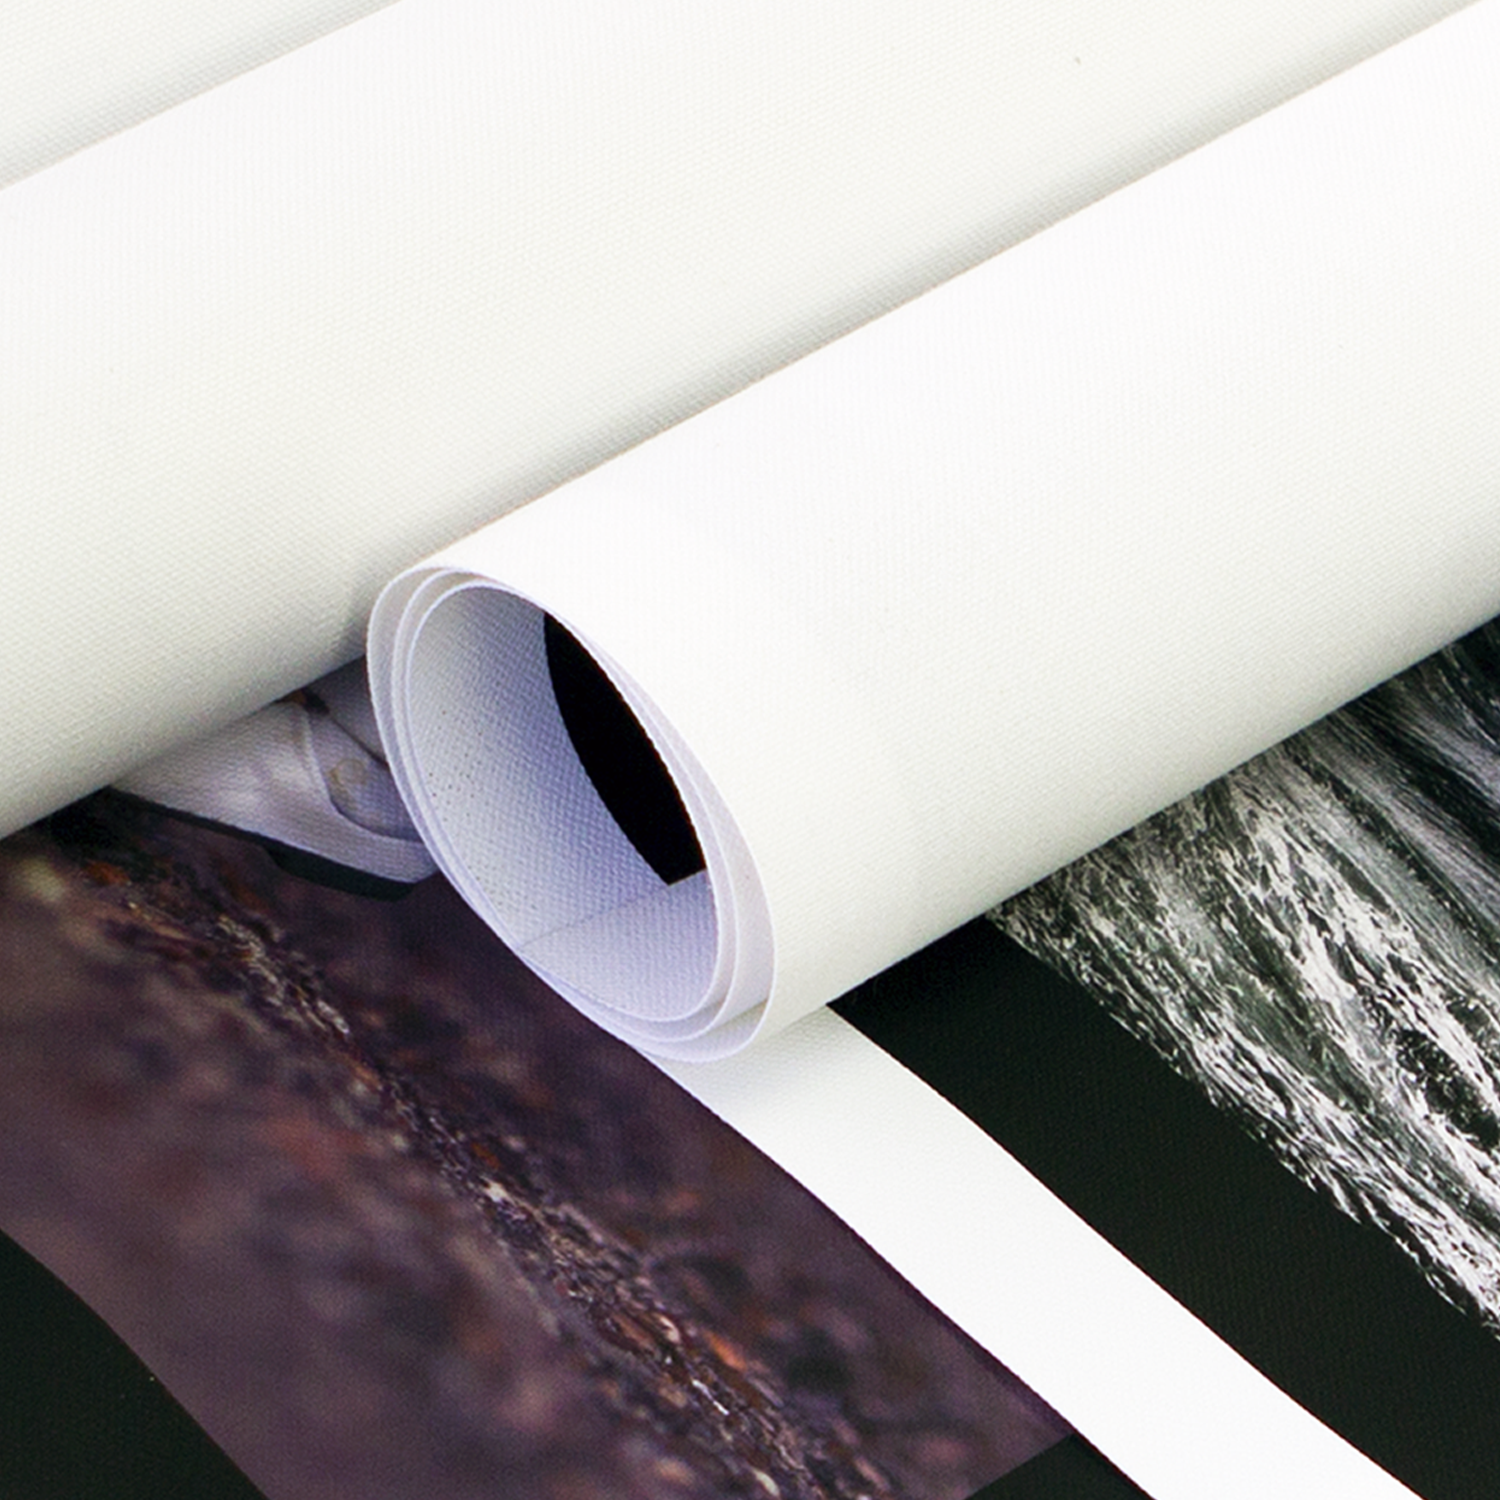  Rolled Canvas Prints